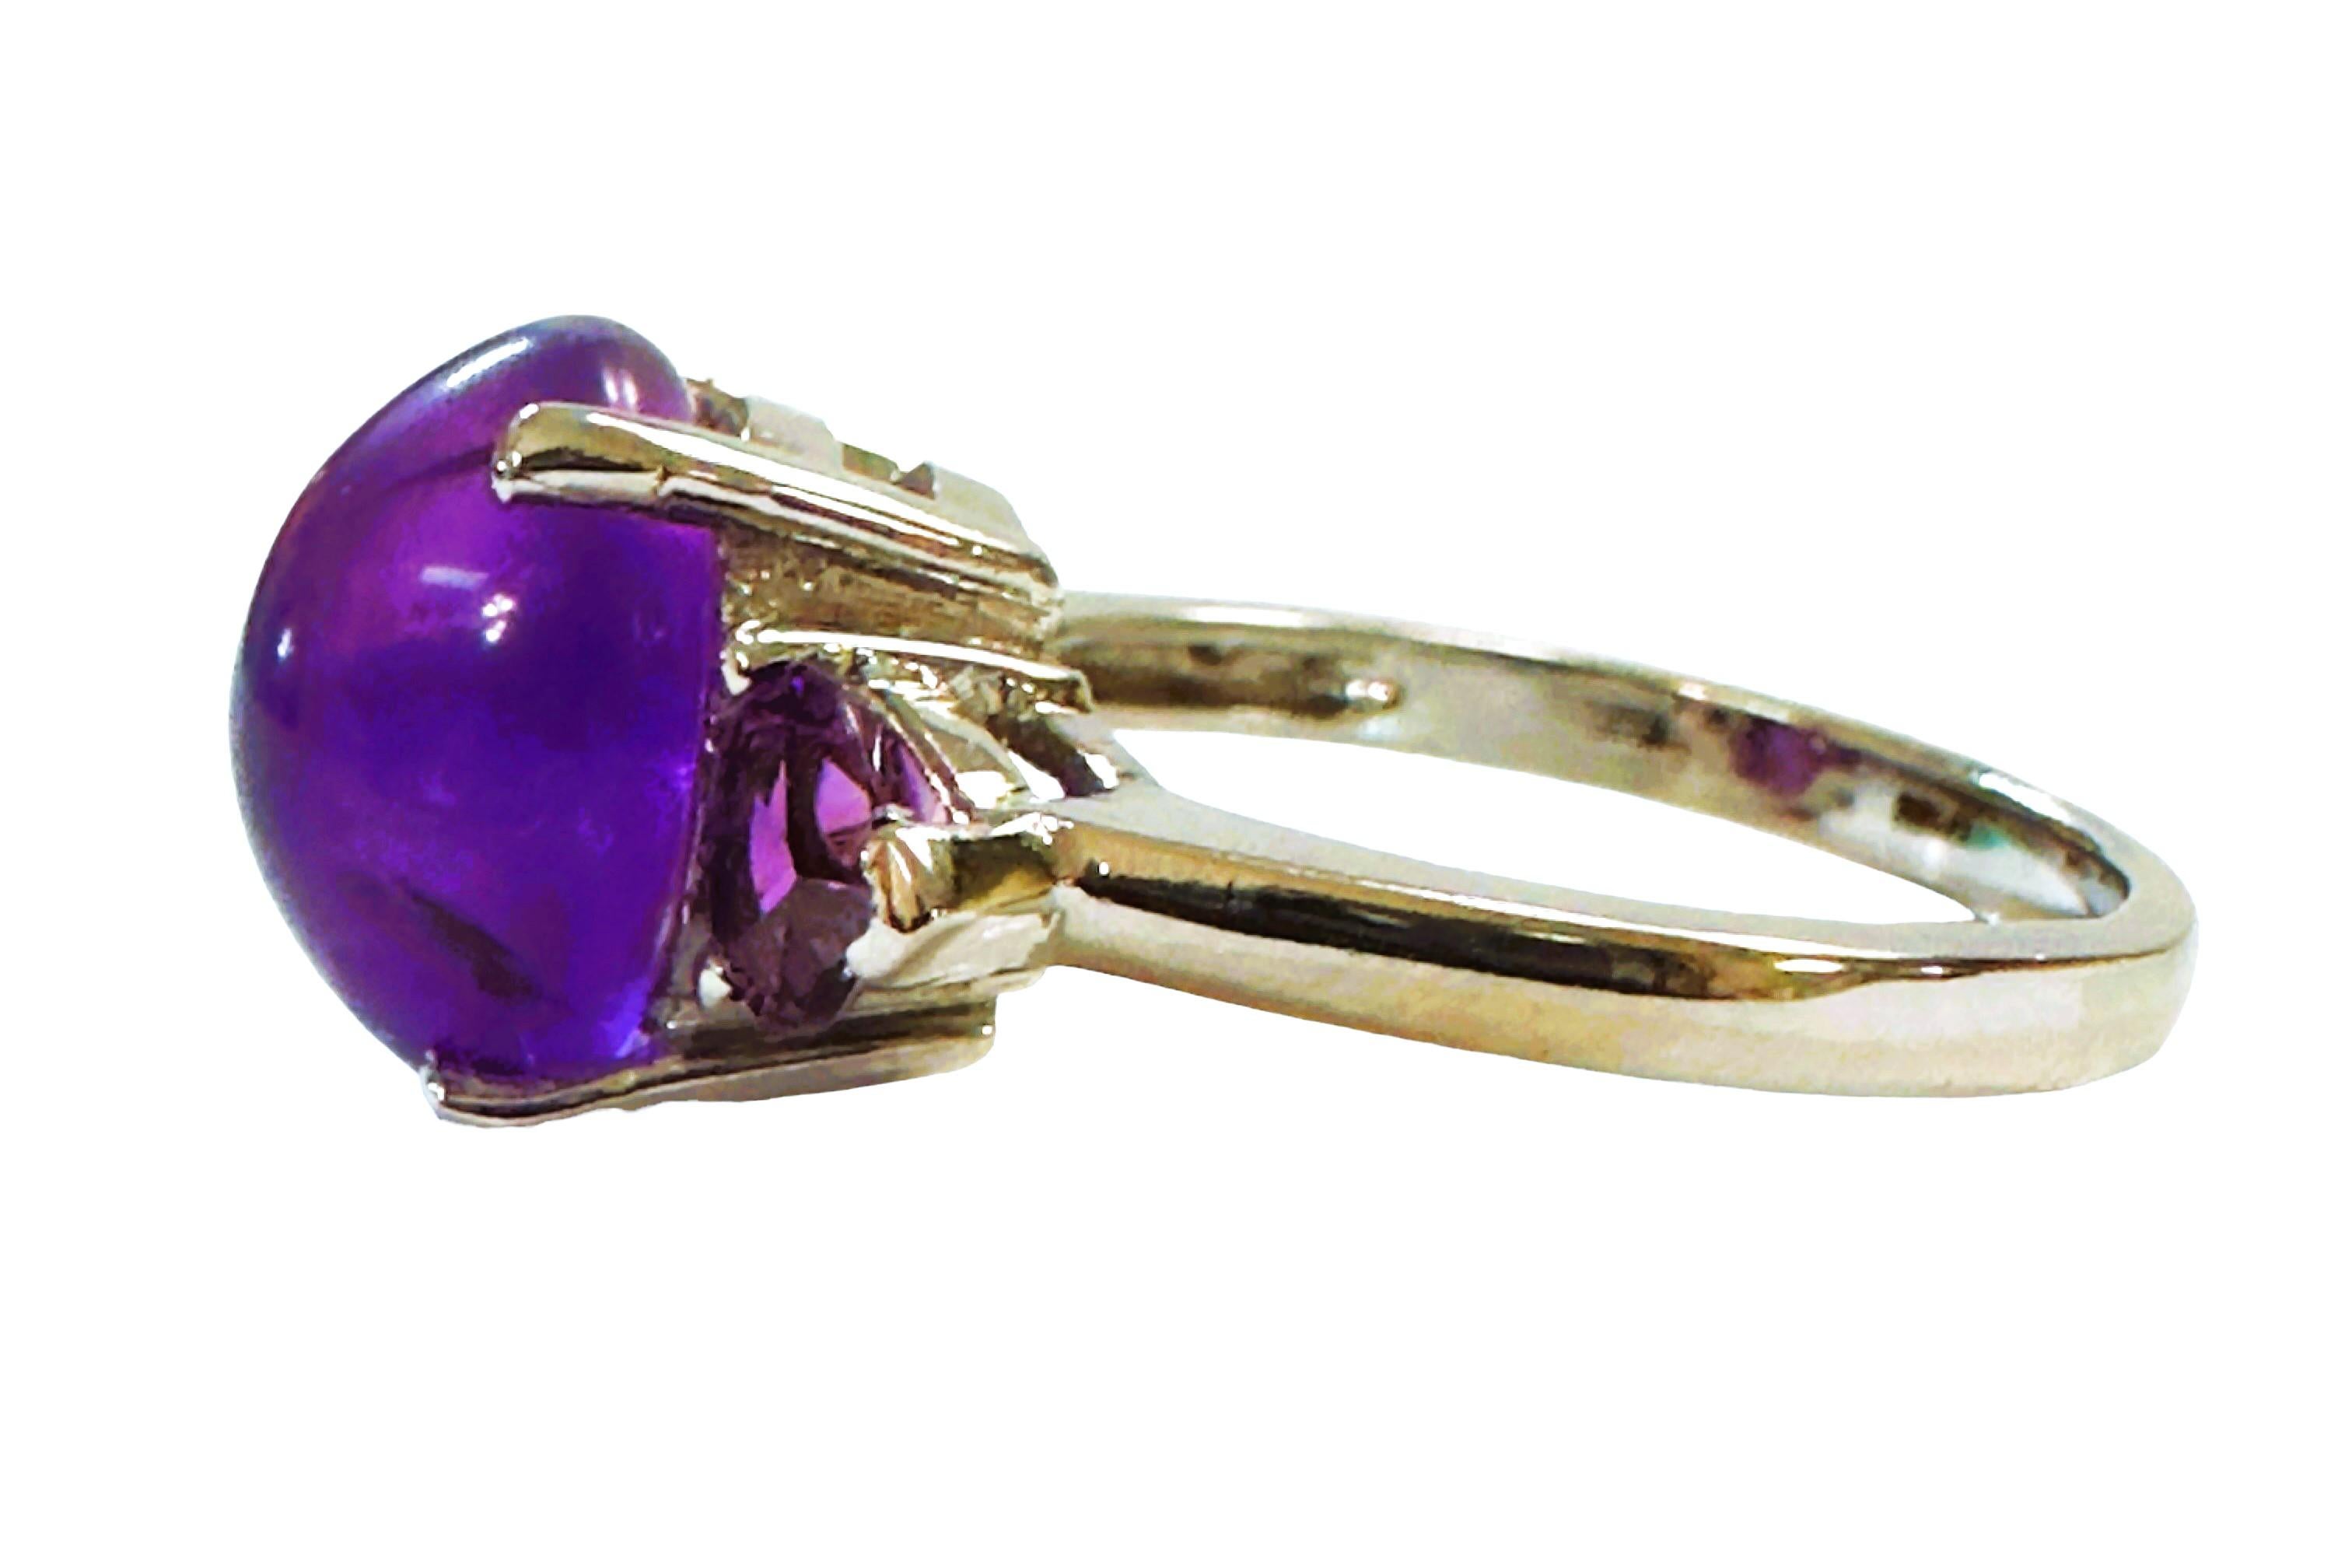 Art Deco New Brazilian 7.3 Ct Cabochon & Trillion Cut Amethyst Sterling Ring Size 7 For Sale